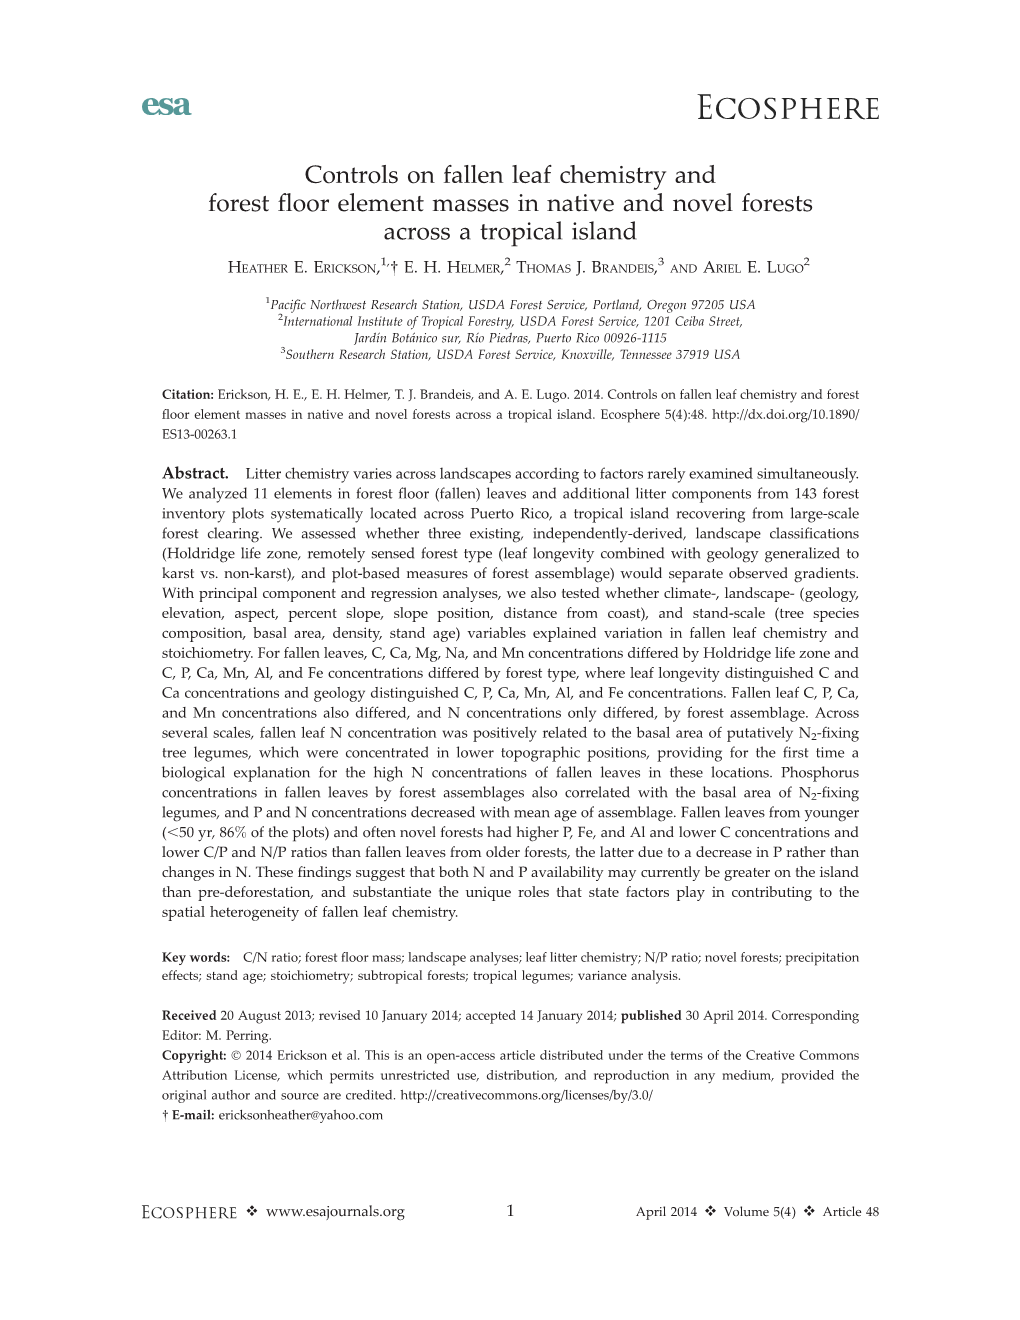 Controls on Fallen Leaf Chemistry and Forest Floor Element Masses in Native and Novel Forests Across a Tropical Island 1, 2 3 2 HEATHER E